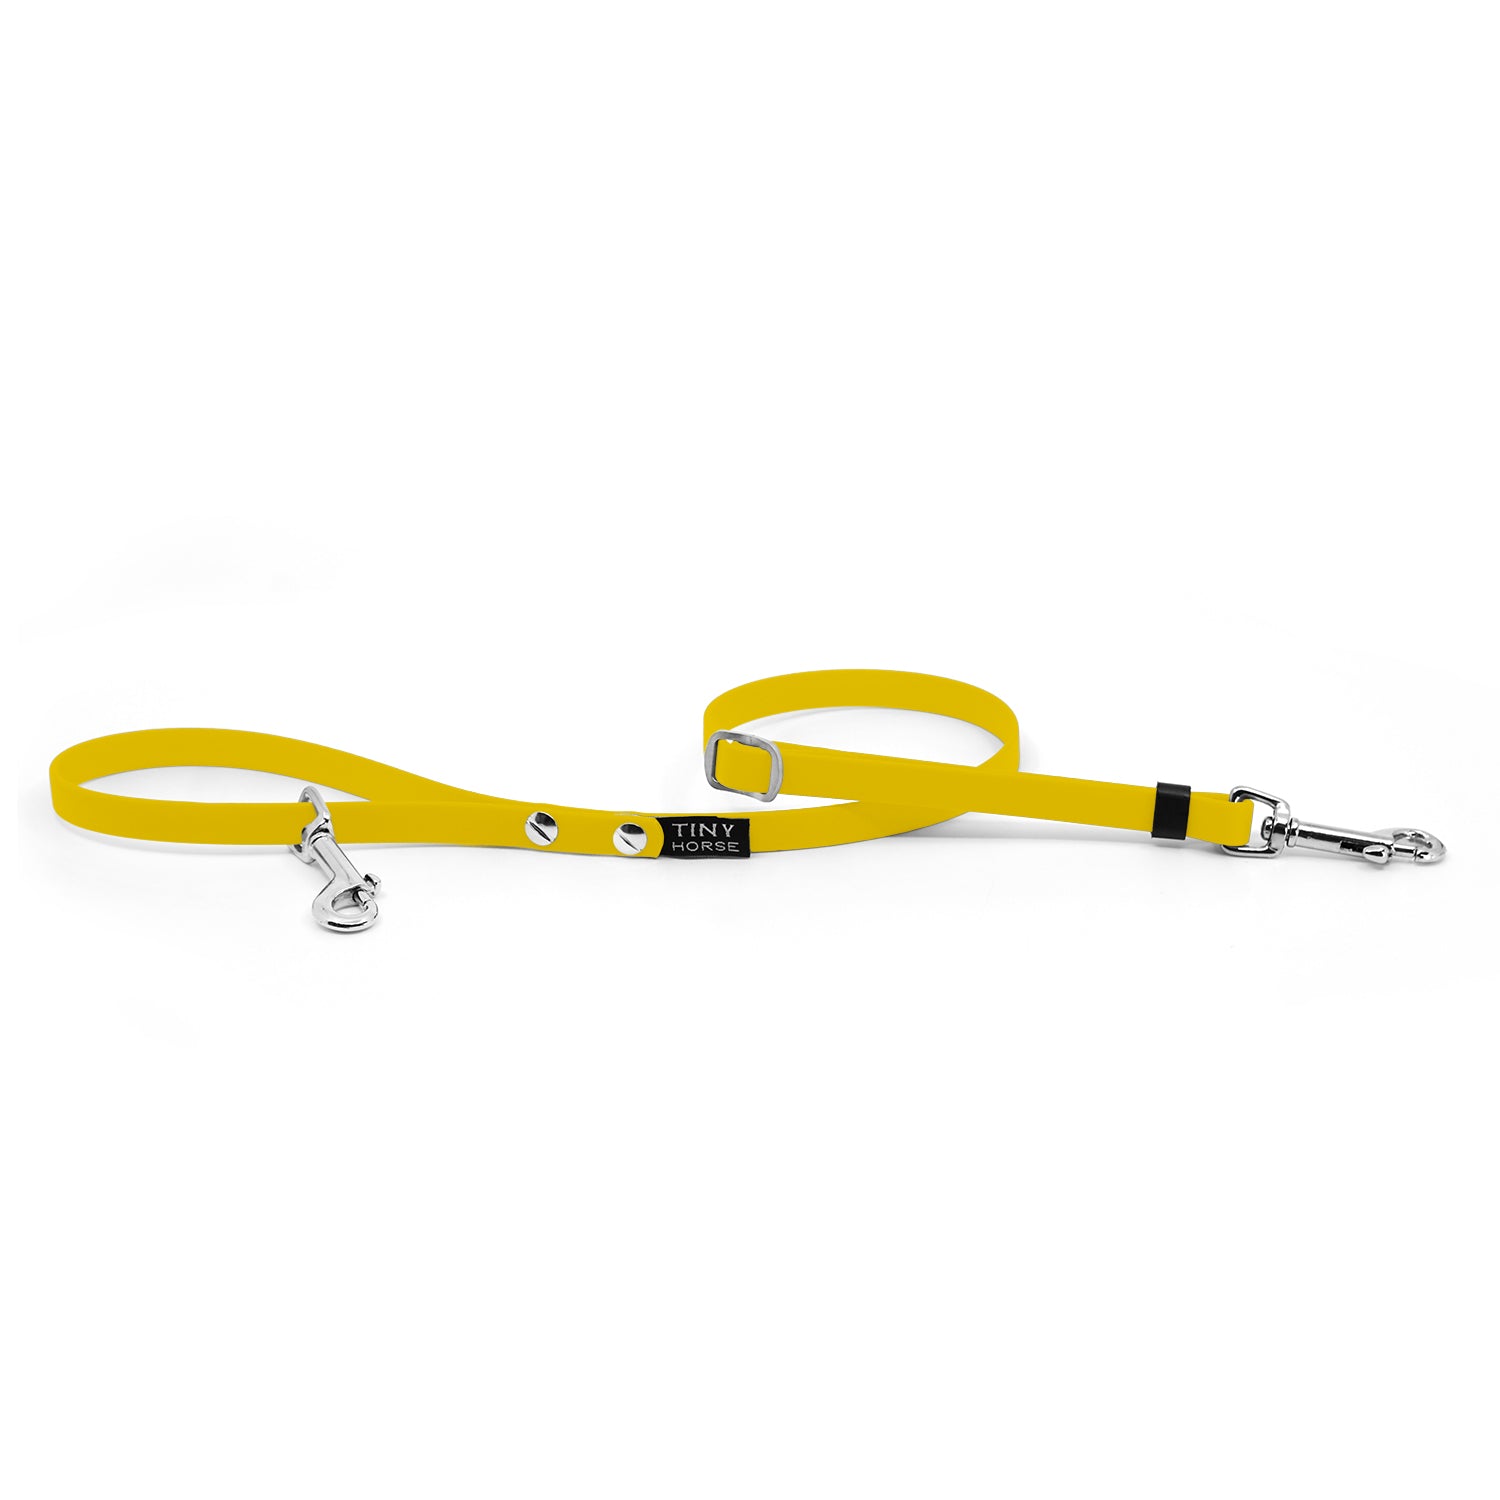 Yellow adjustable biothane leash for walking smaller dogs